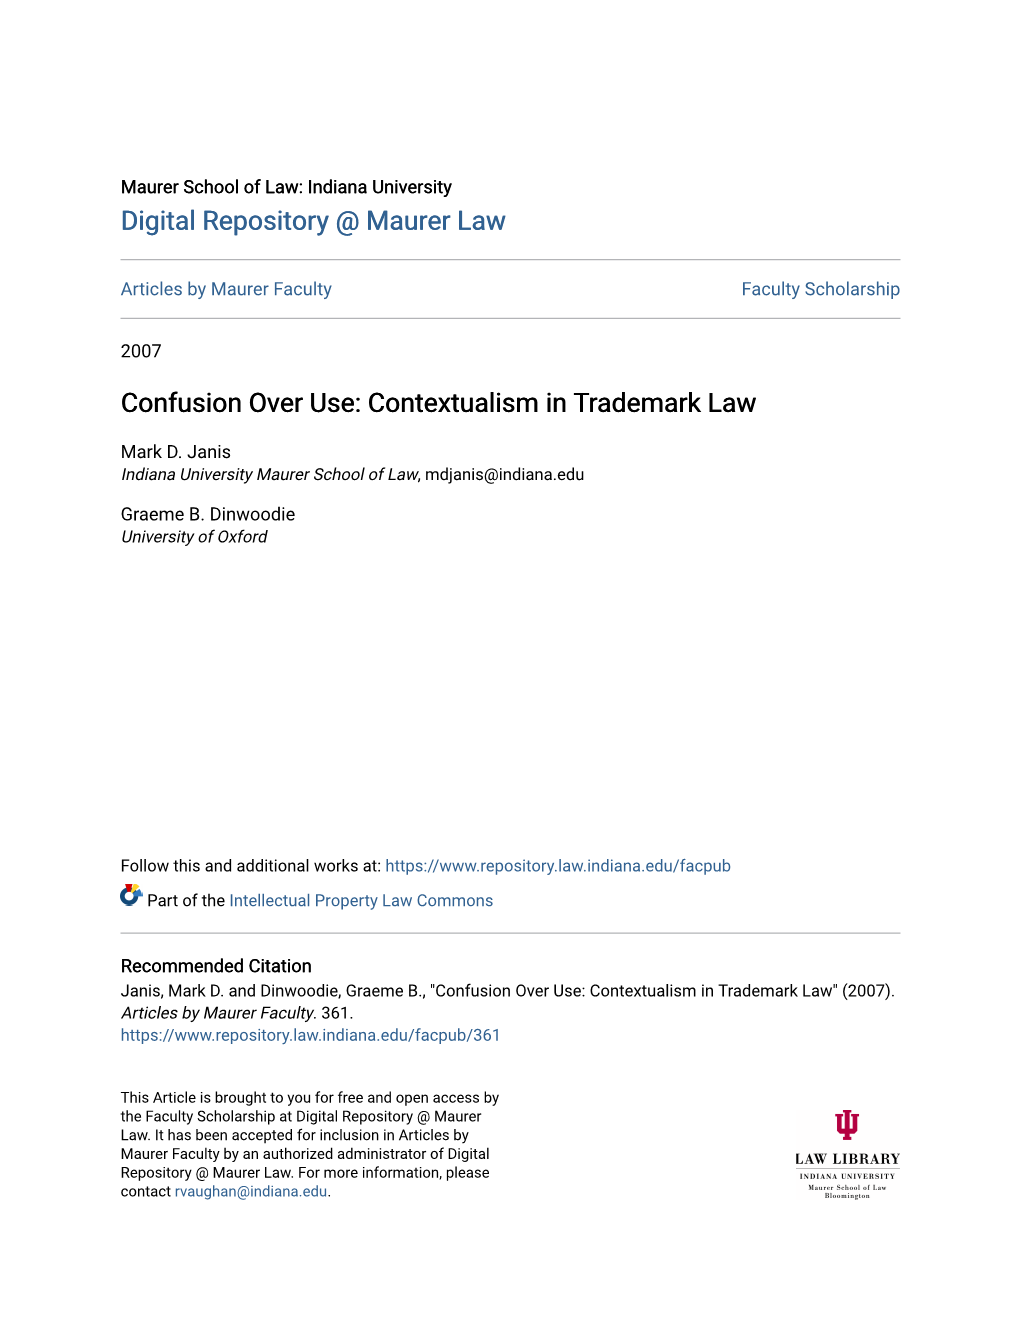 Confusion Over Use: Contextualism in Trademark Law